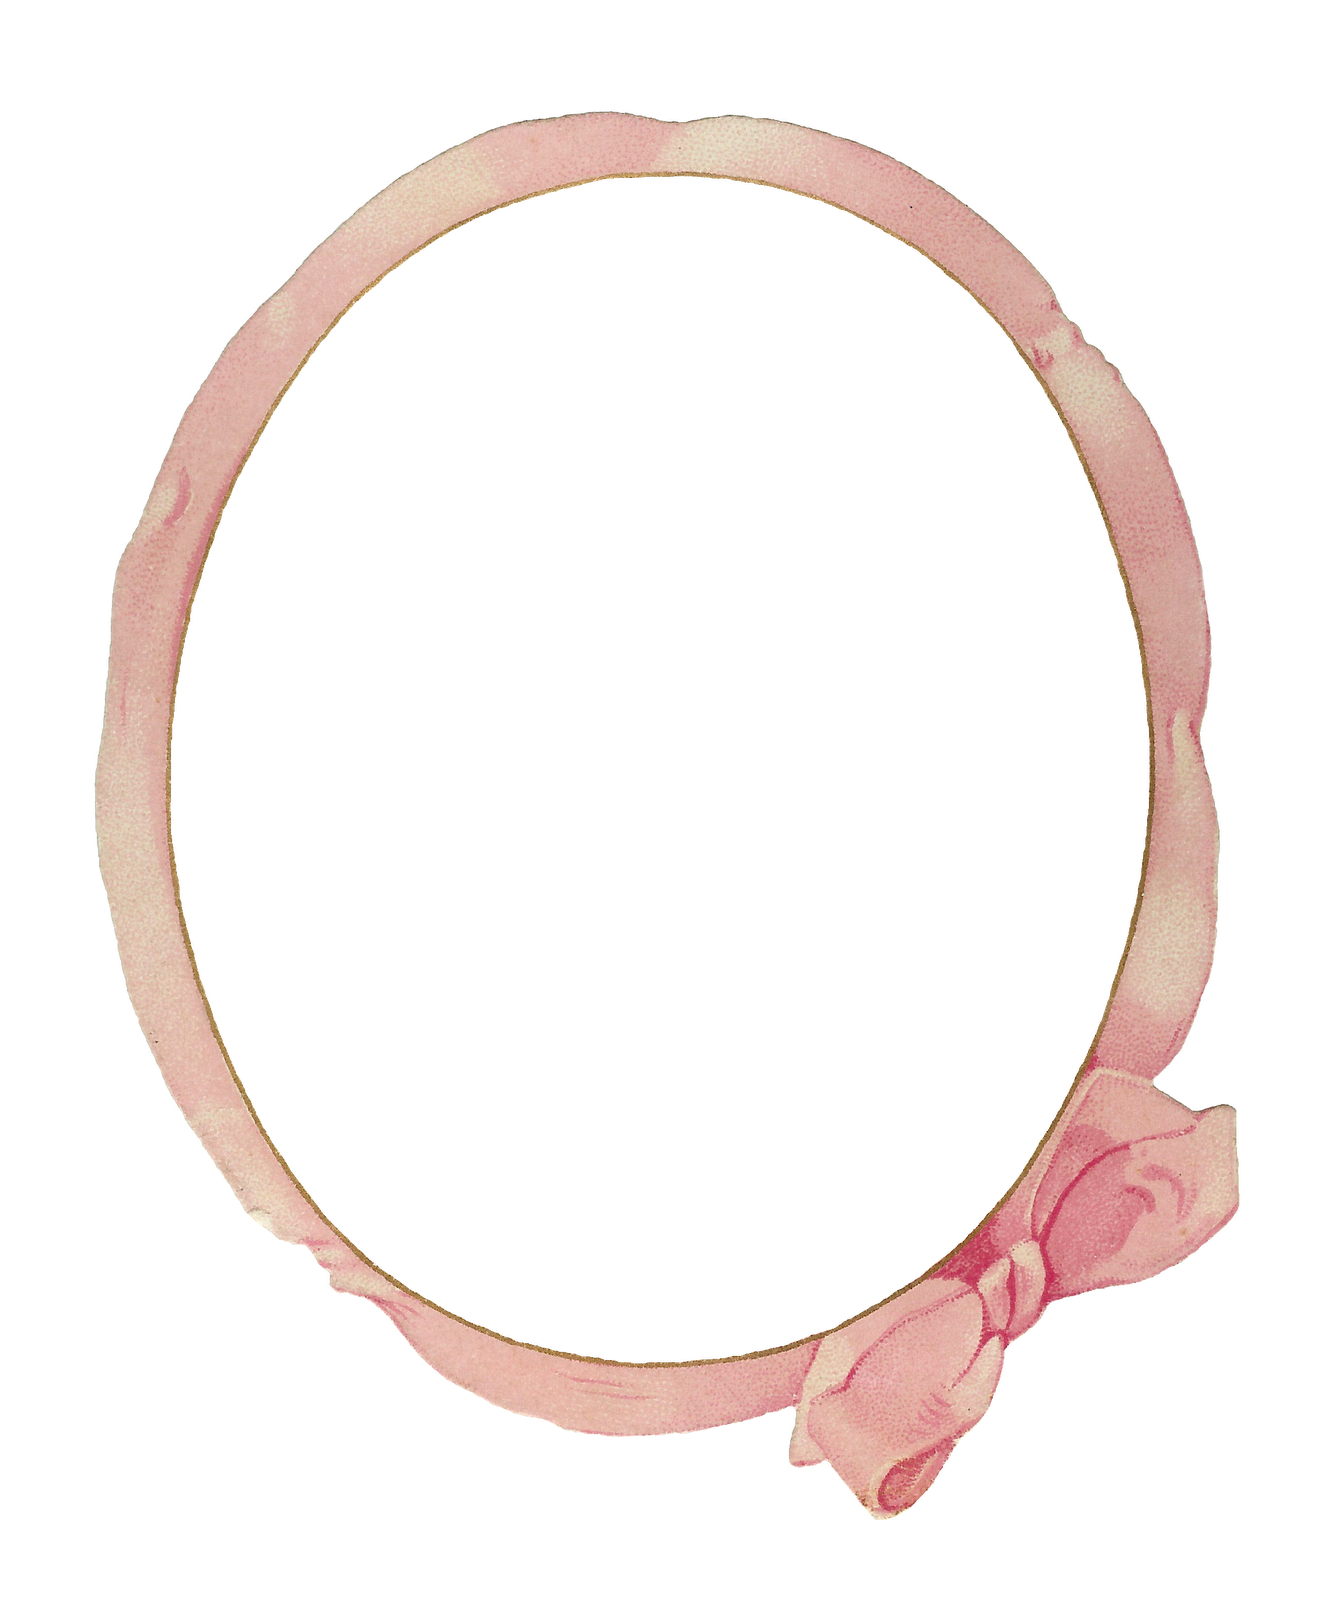 Free Clip Art Of Baby  Vintage Baby Clip Art Pink Bow Decorative Frame    